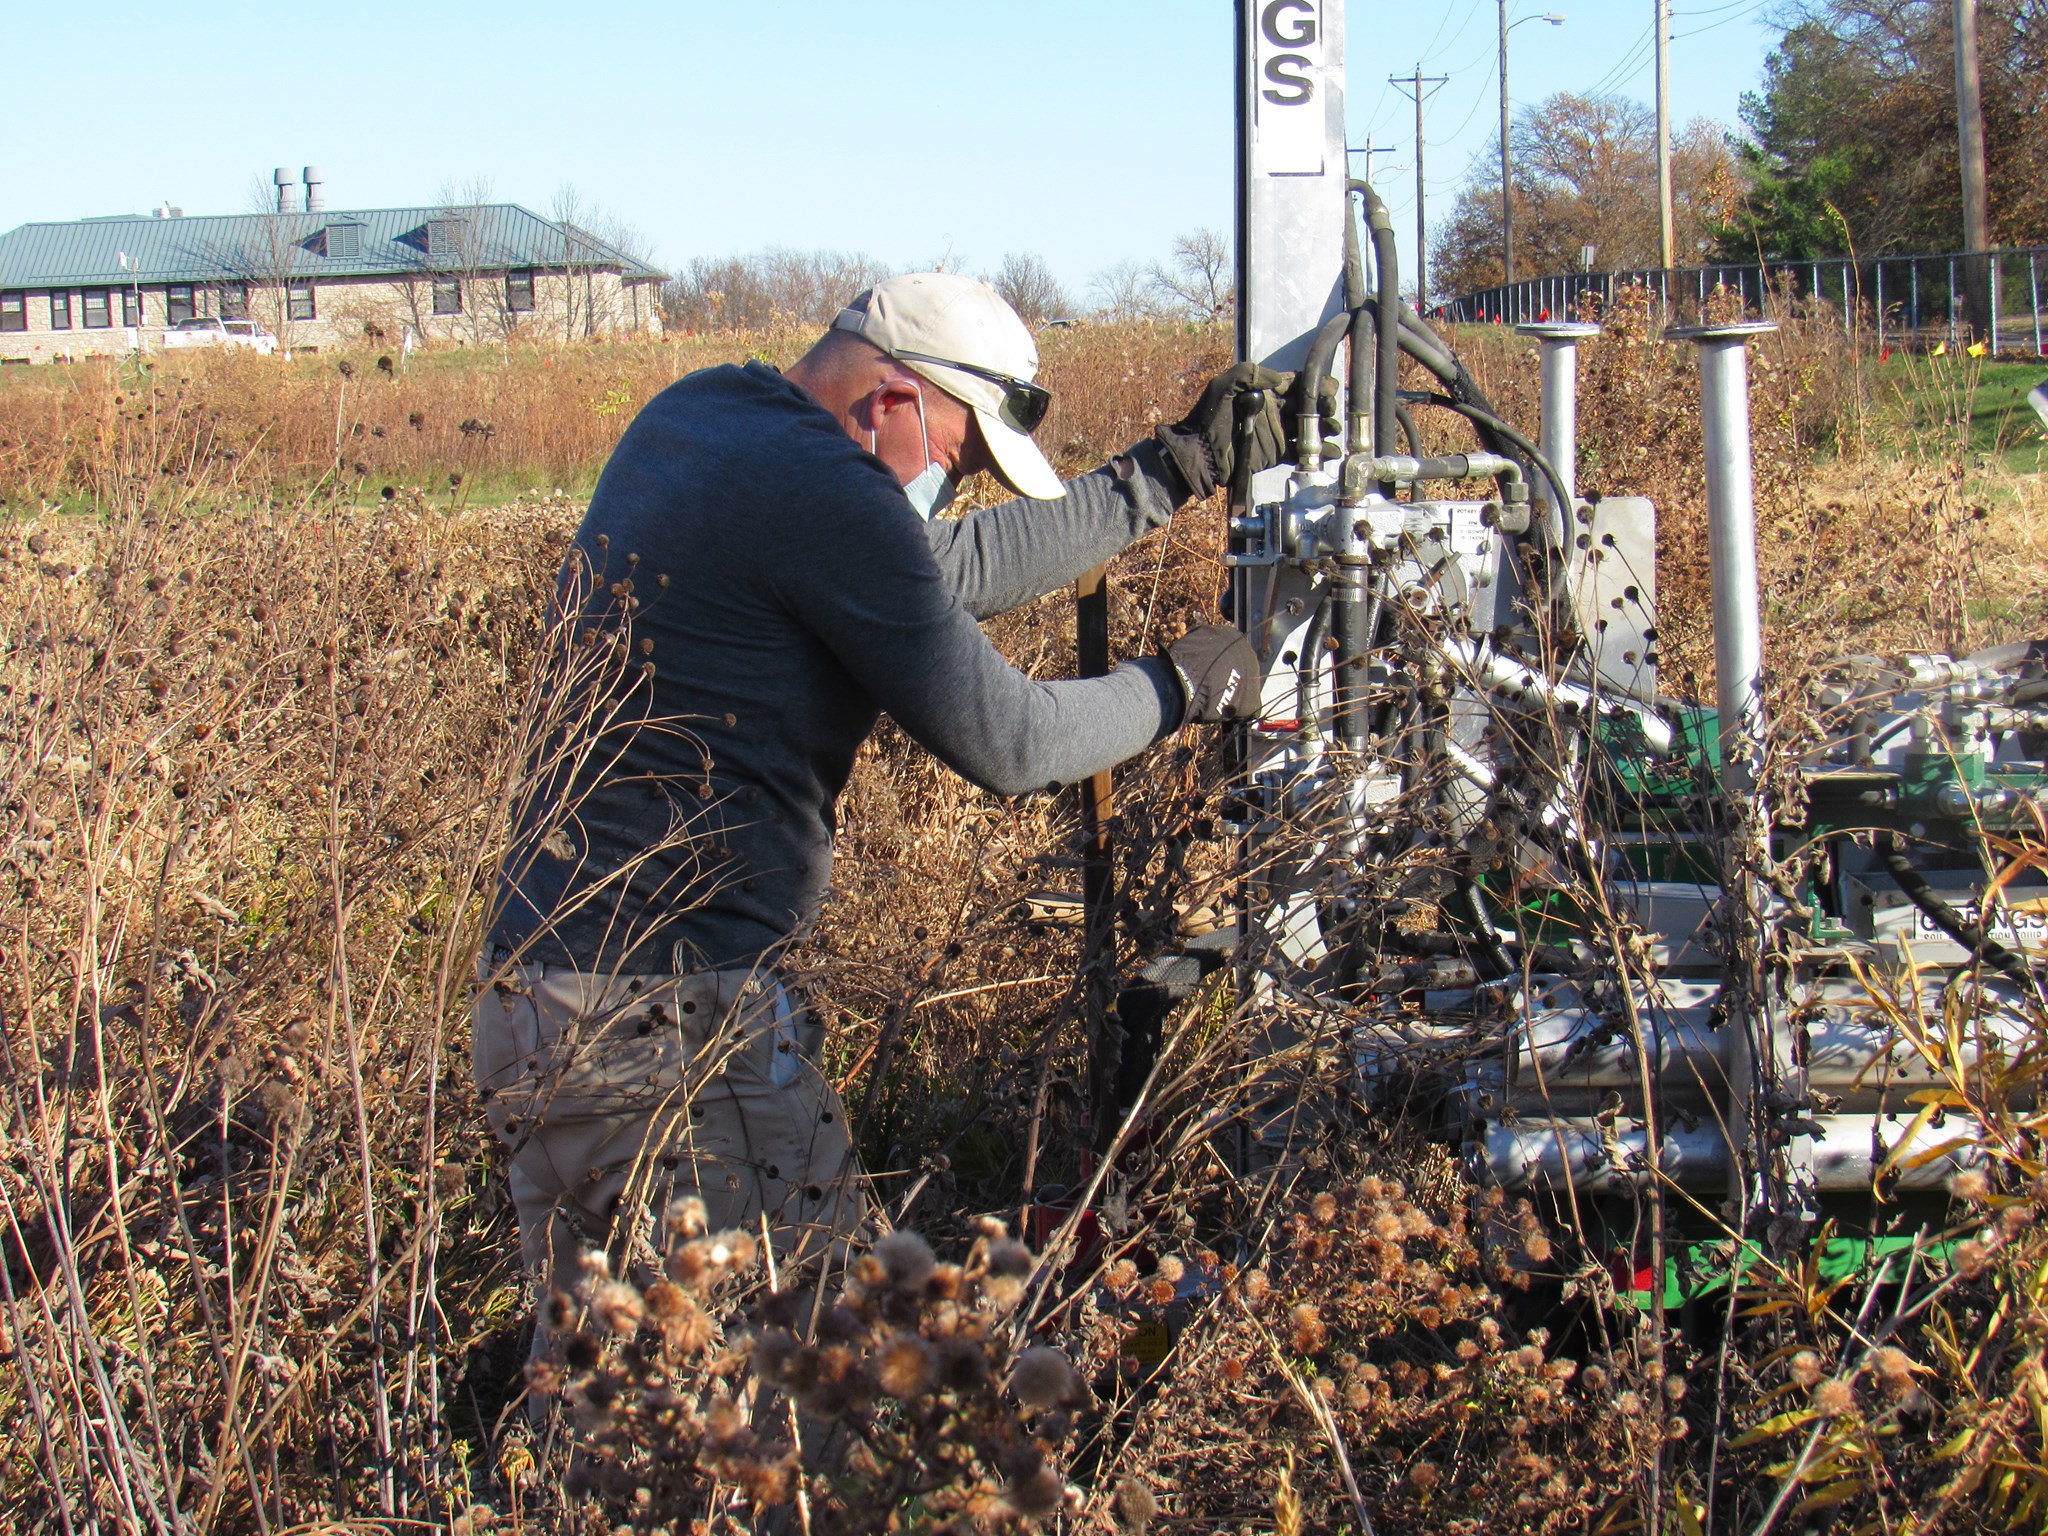 Soil cores from Sanborn Field offer soil health analysis opportunities (click to read)